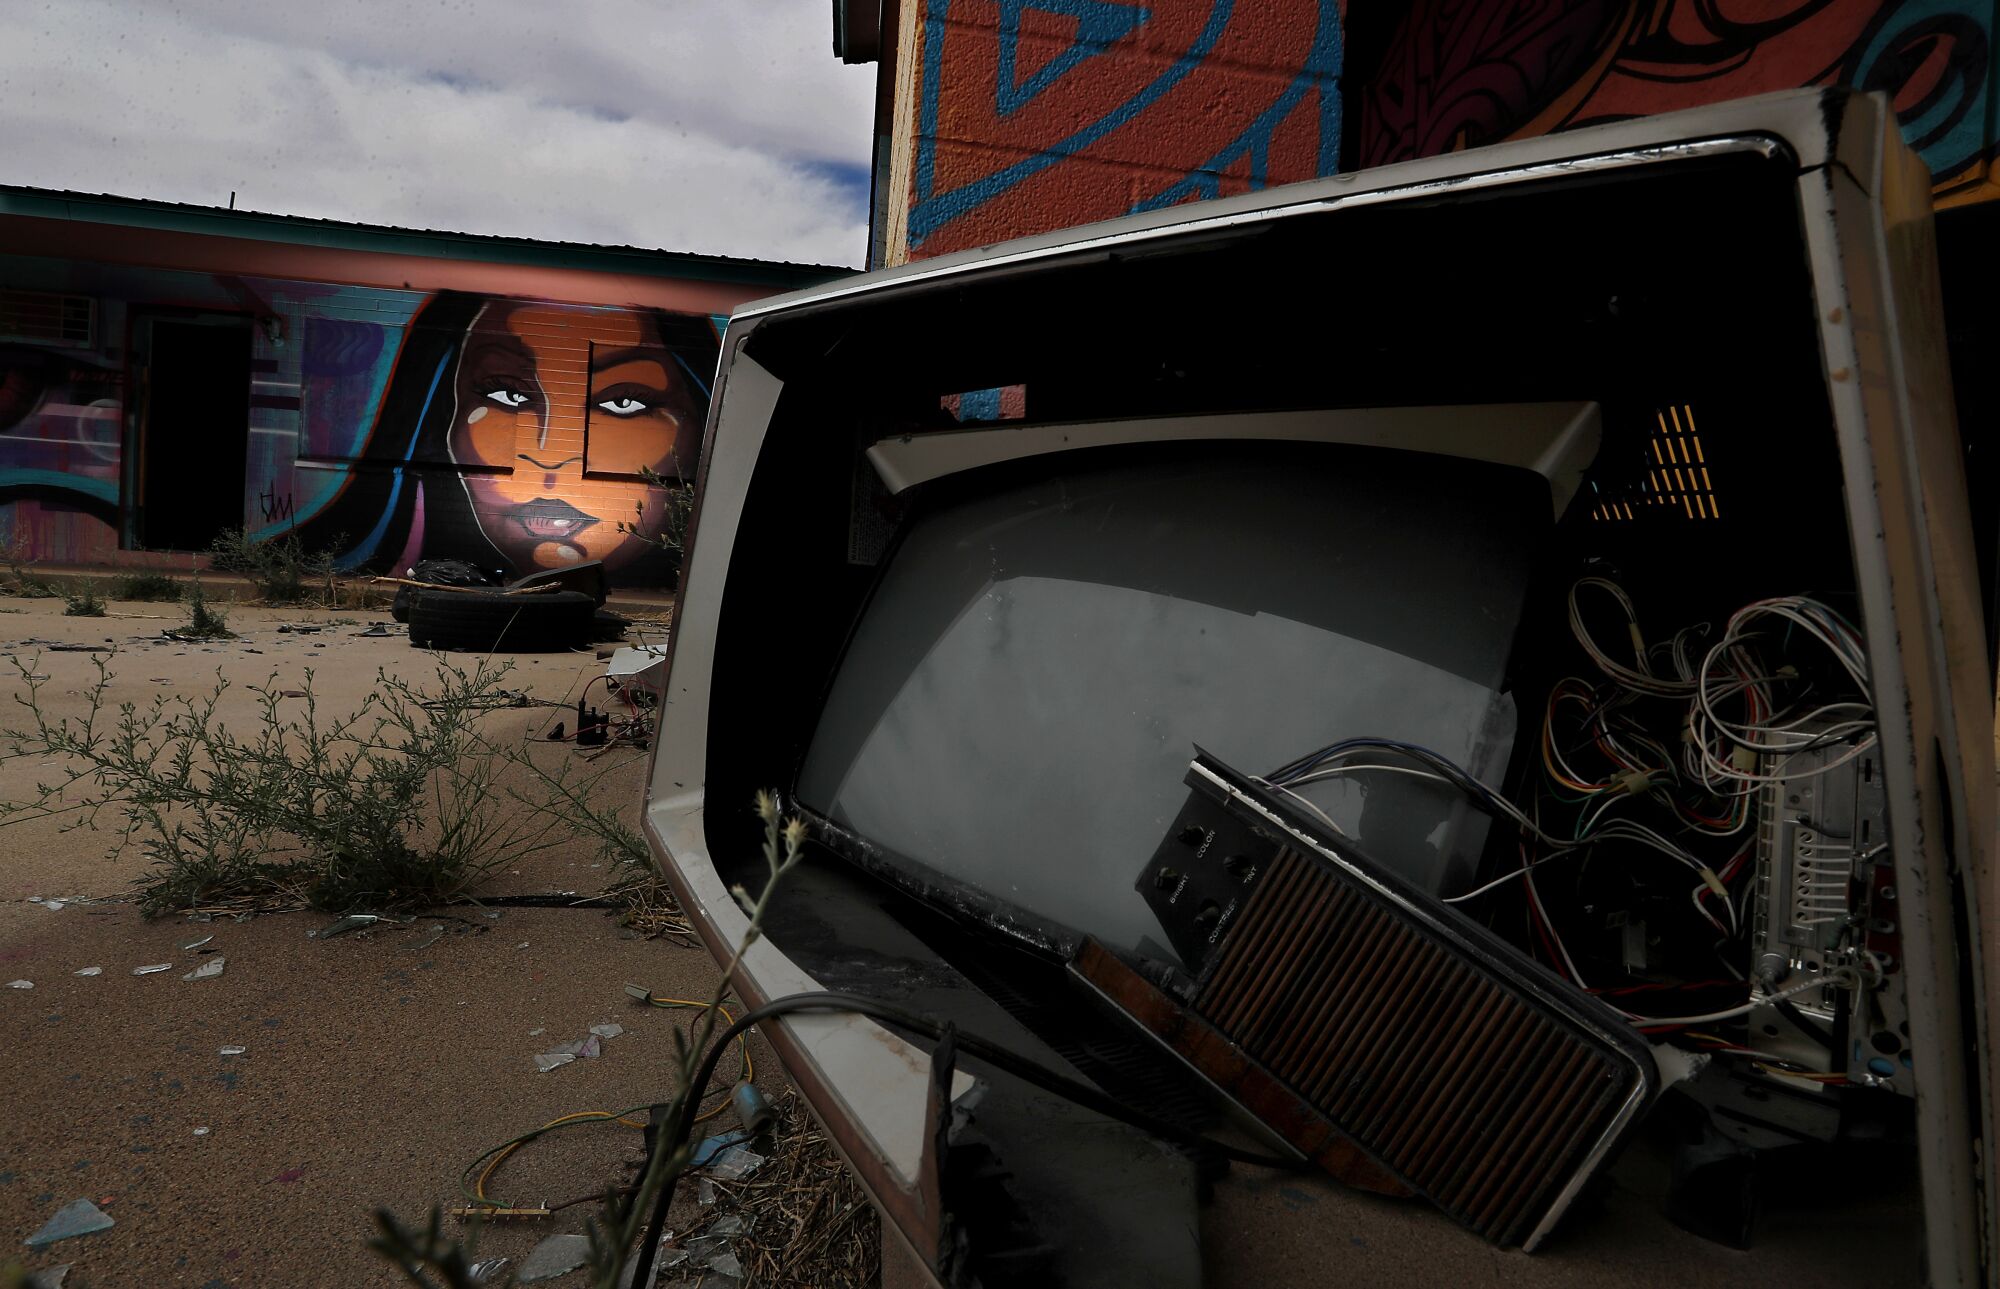 The Painted Desert Project, an art installation in an abandoned motel along Highway 89